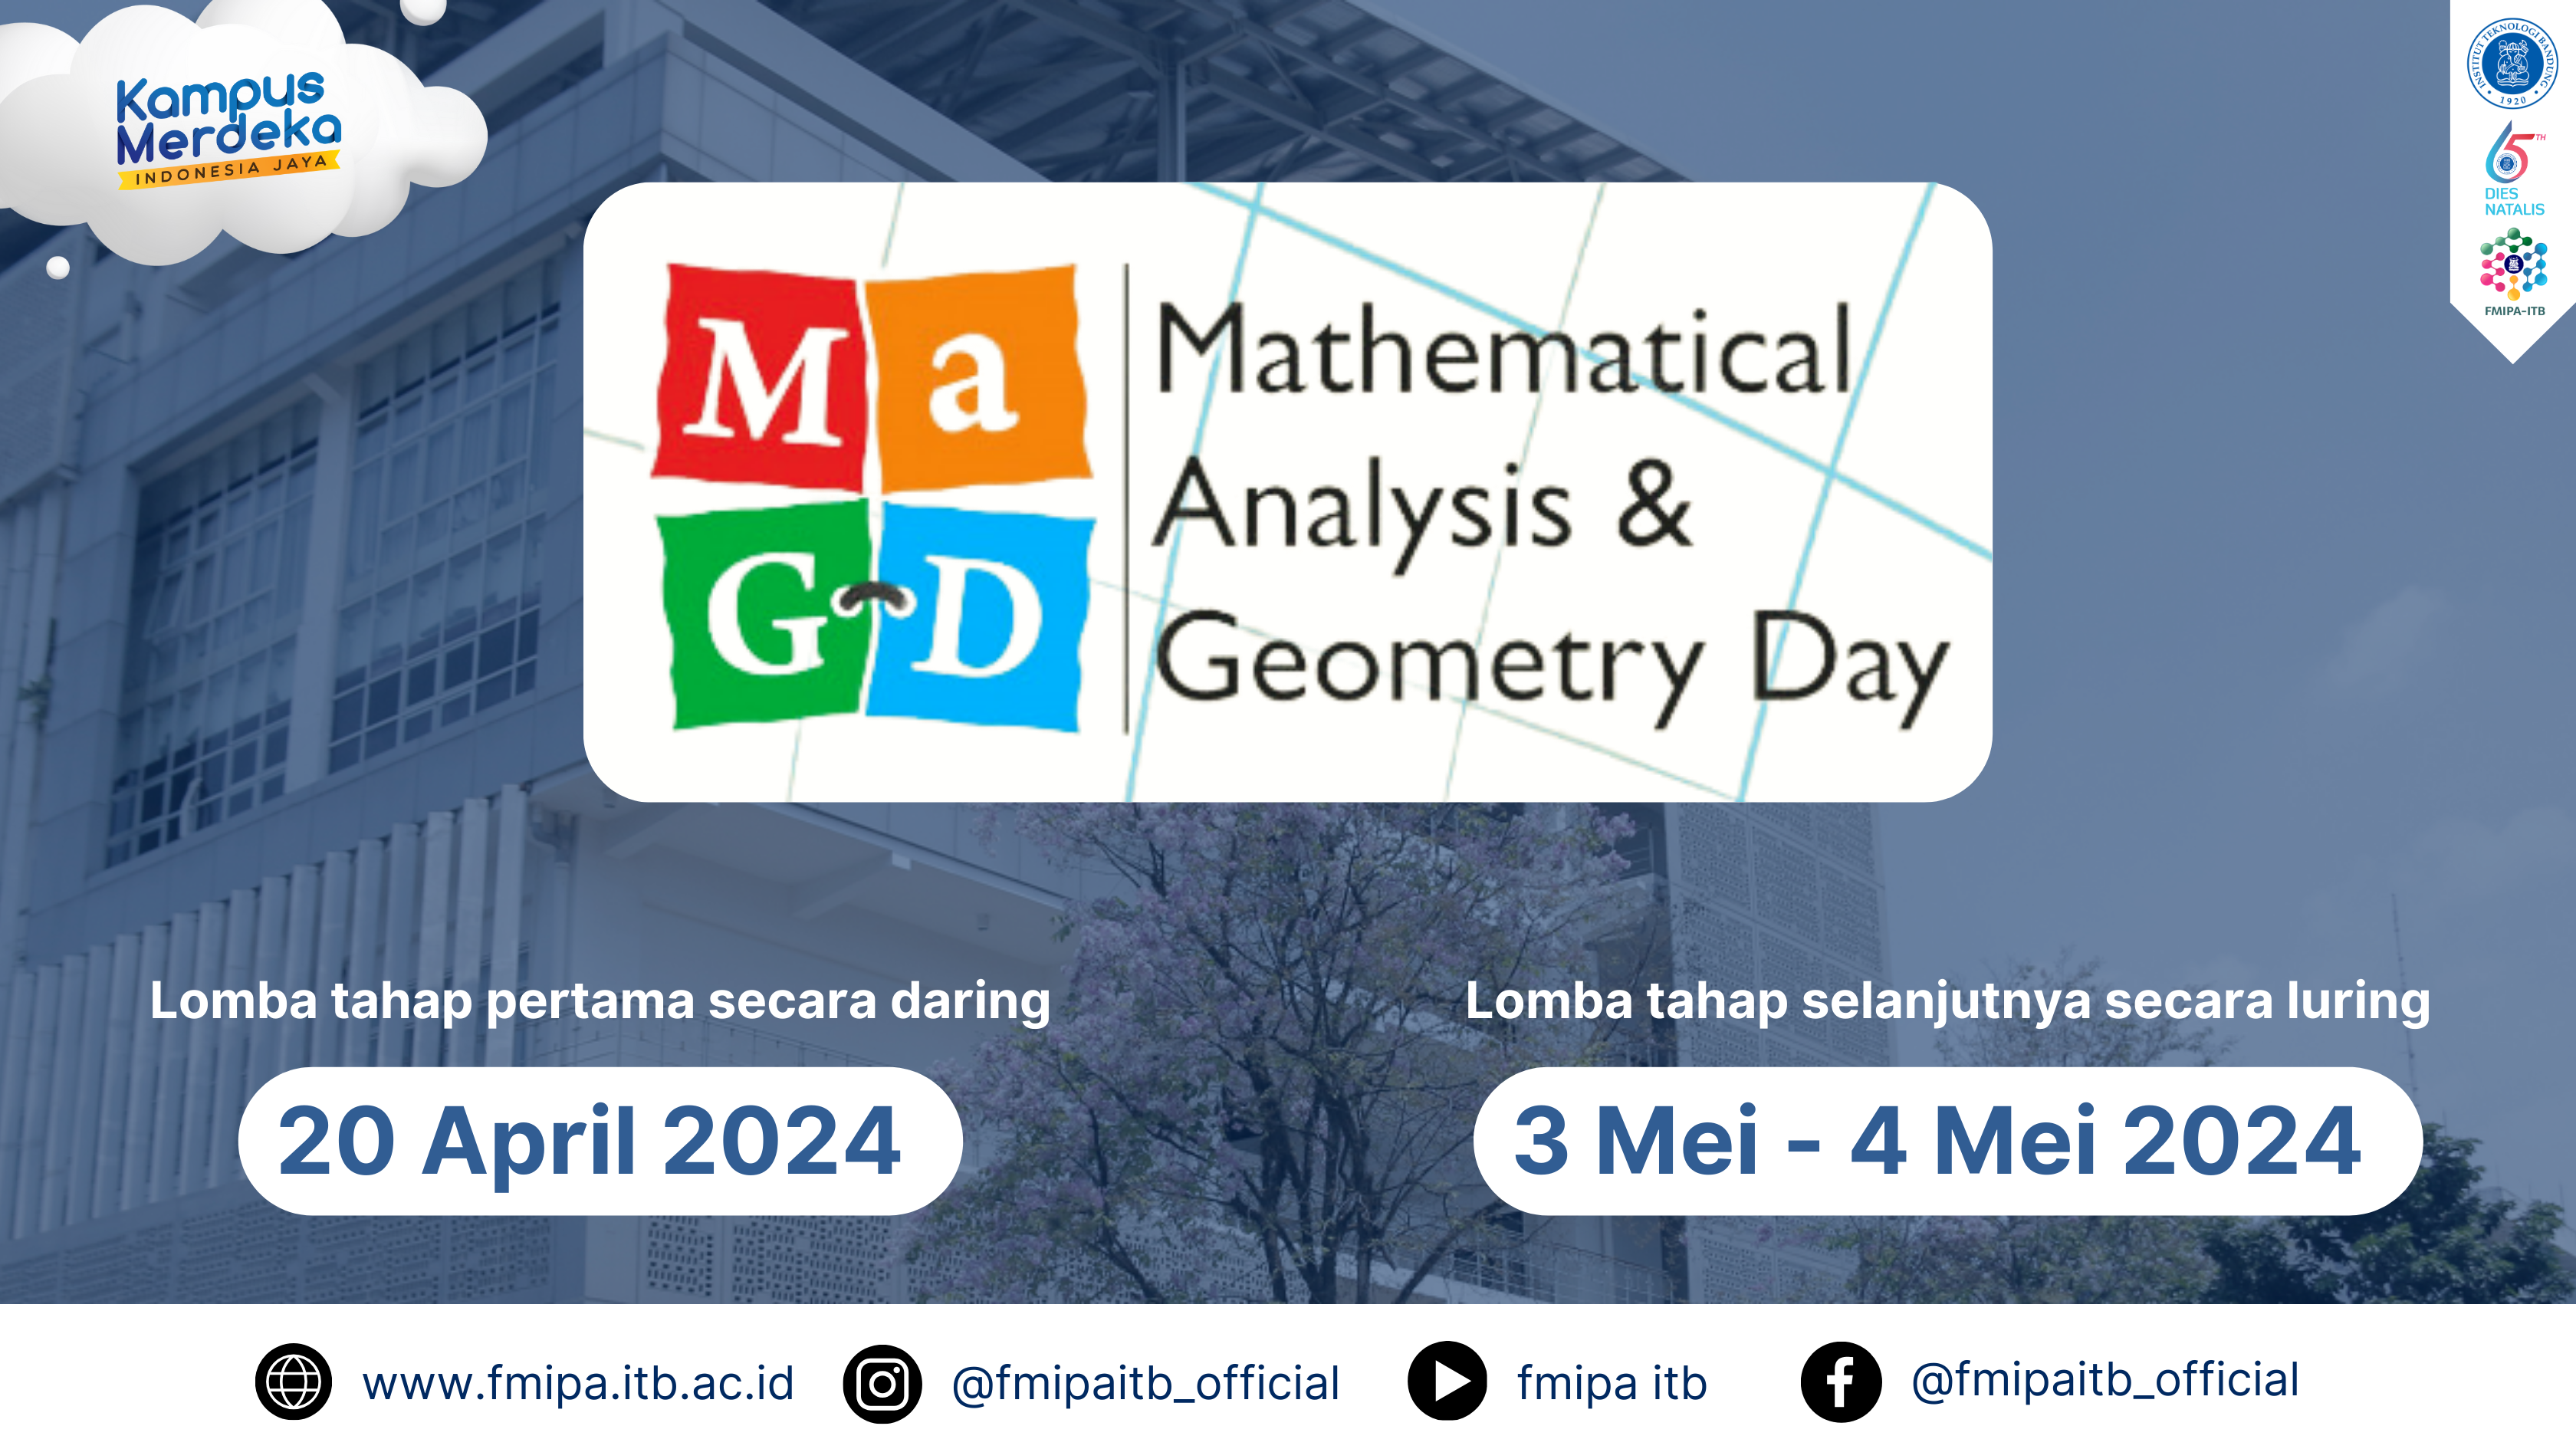 Mathematical Analysis & Geometry Day (MagD-Day) 2024